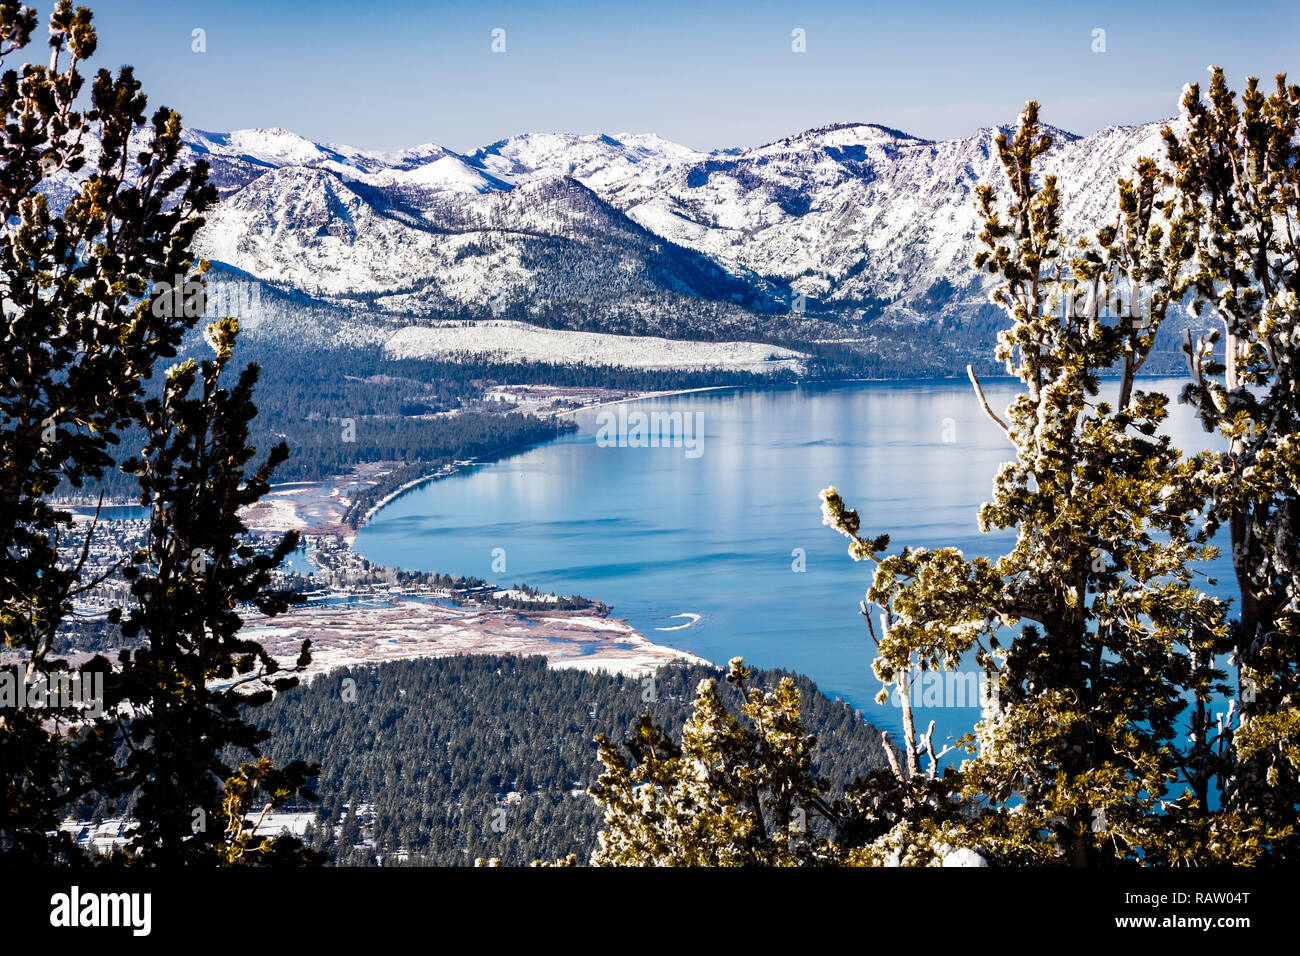 Aerial view of Lake Tahoe on a sunny winter day, Sierra mountains covered  in snow visible in the background, California Stock Photo - Alamy